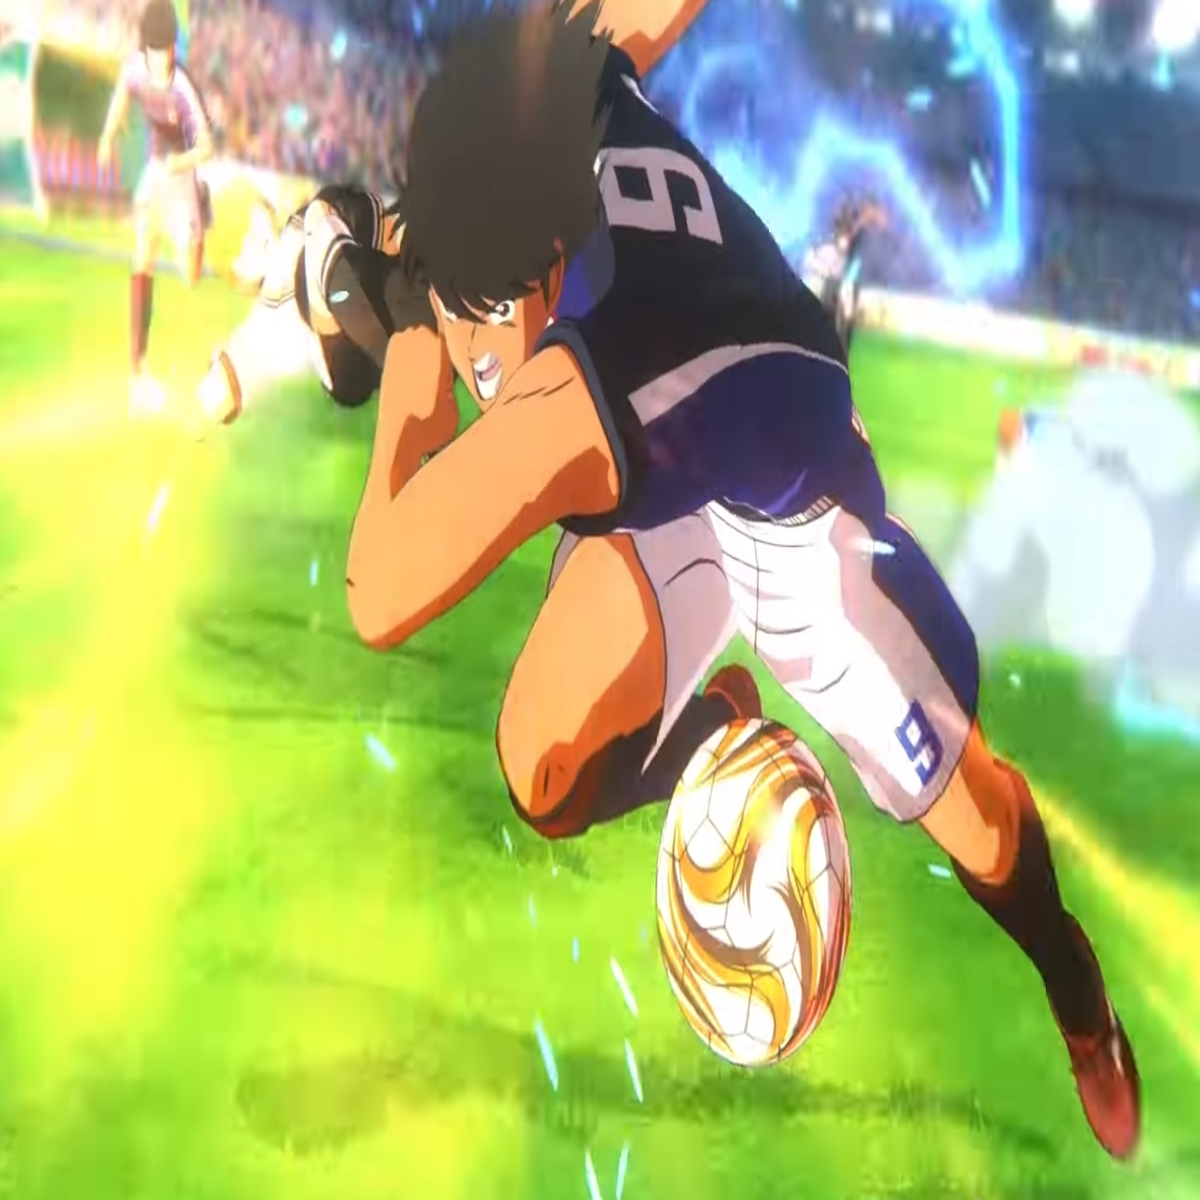 10 Anime Heroes Who Would Be Better Soccer Players Than Blue Lock's Isagi